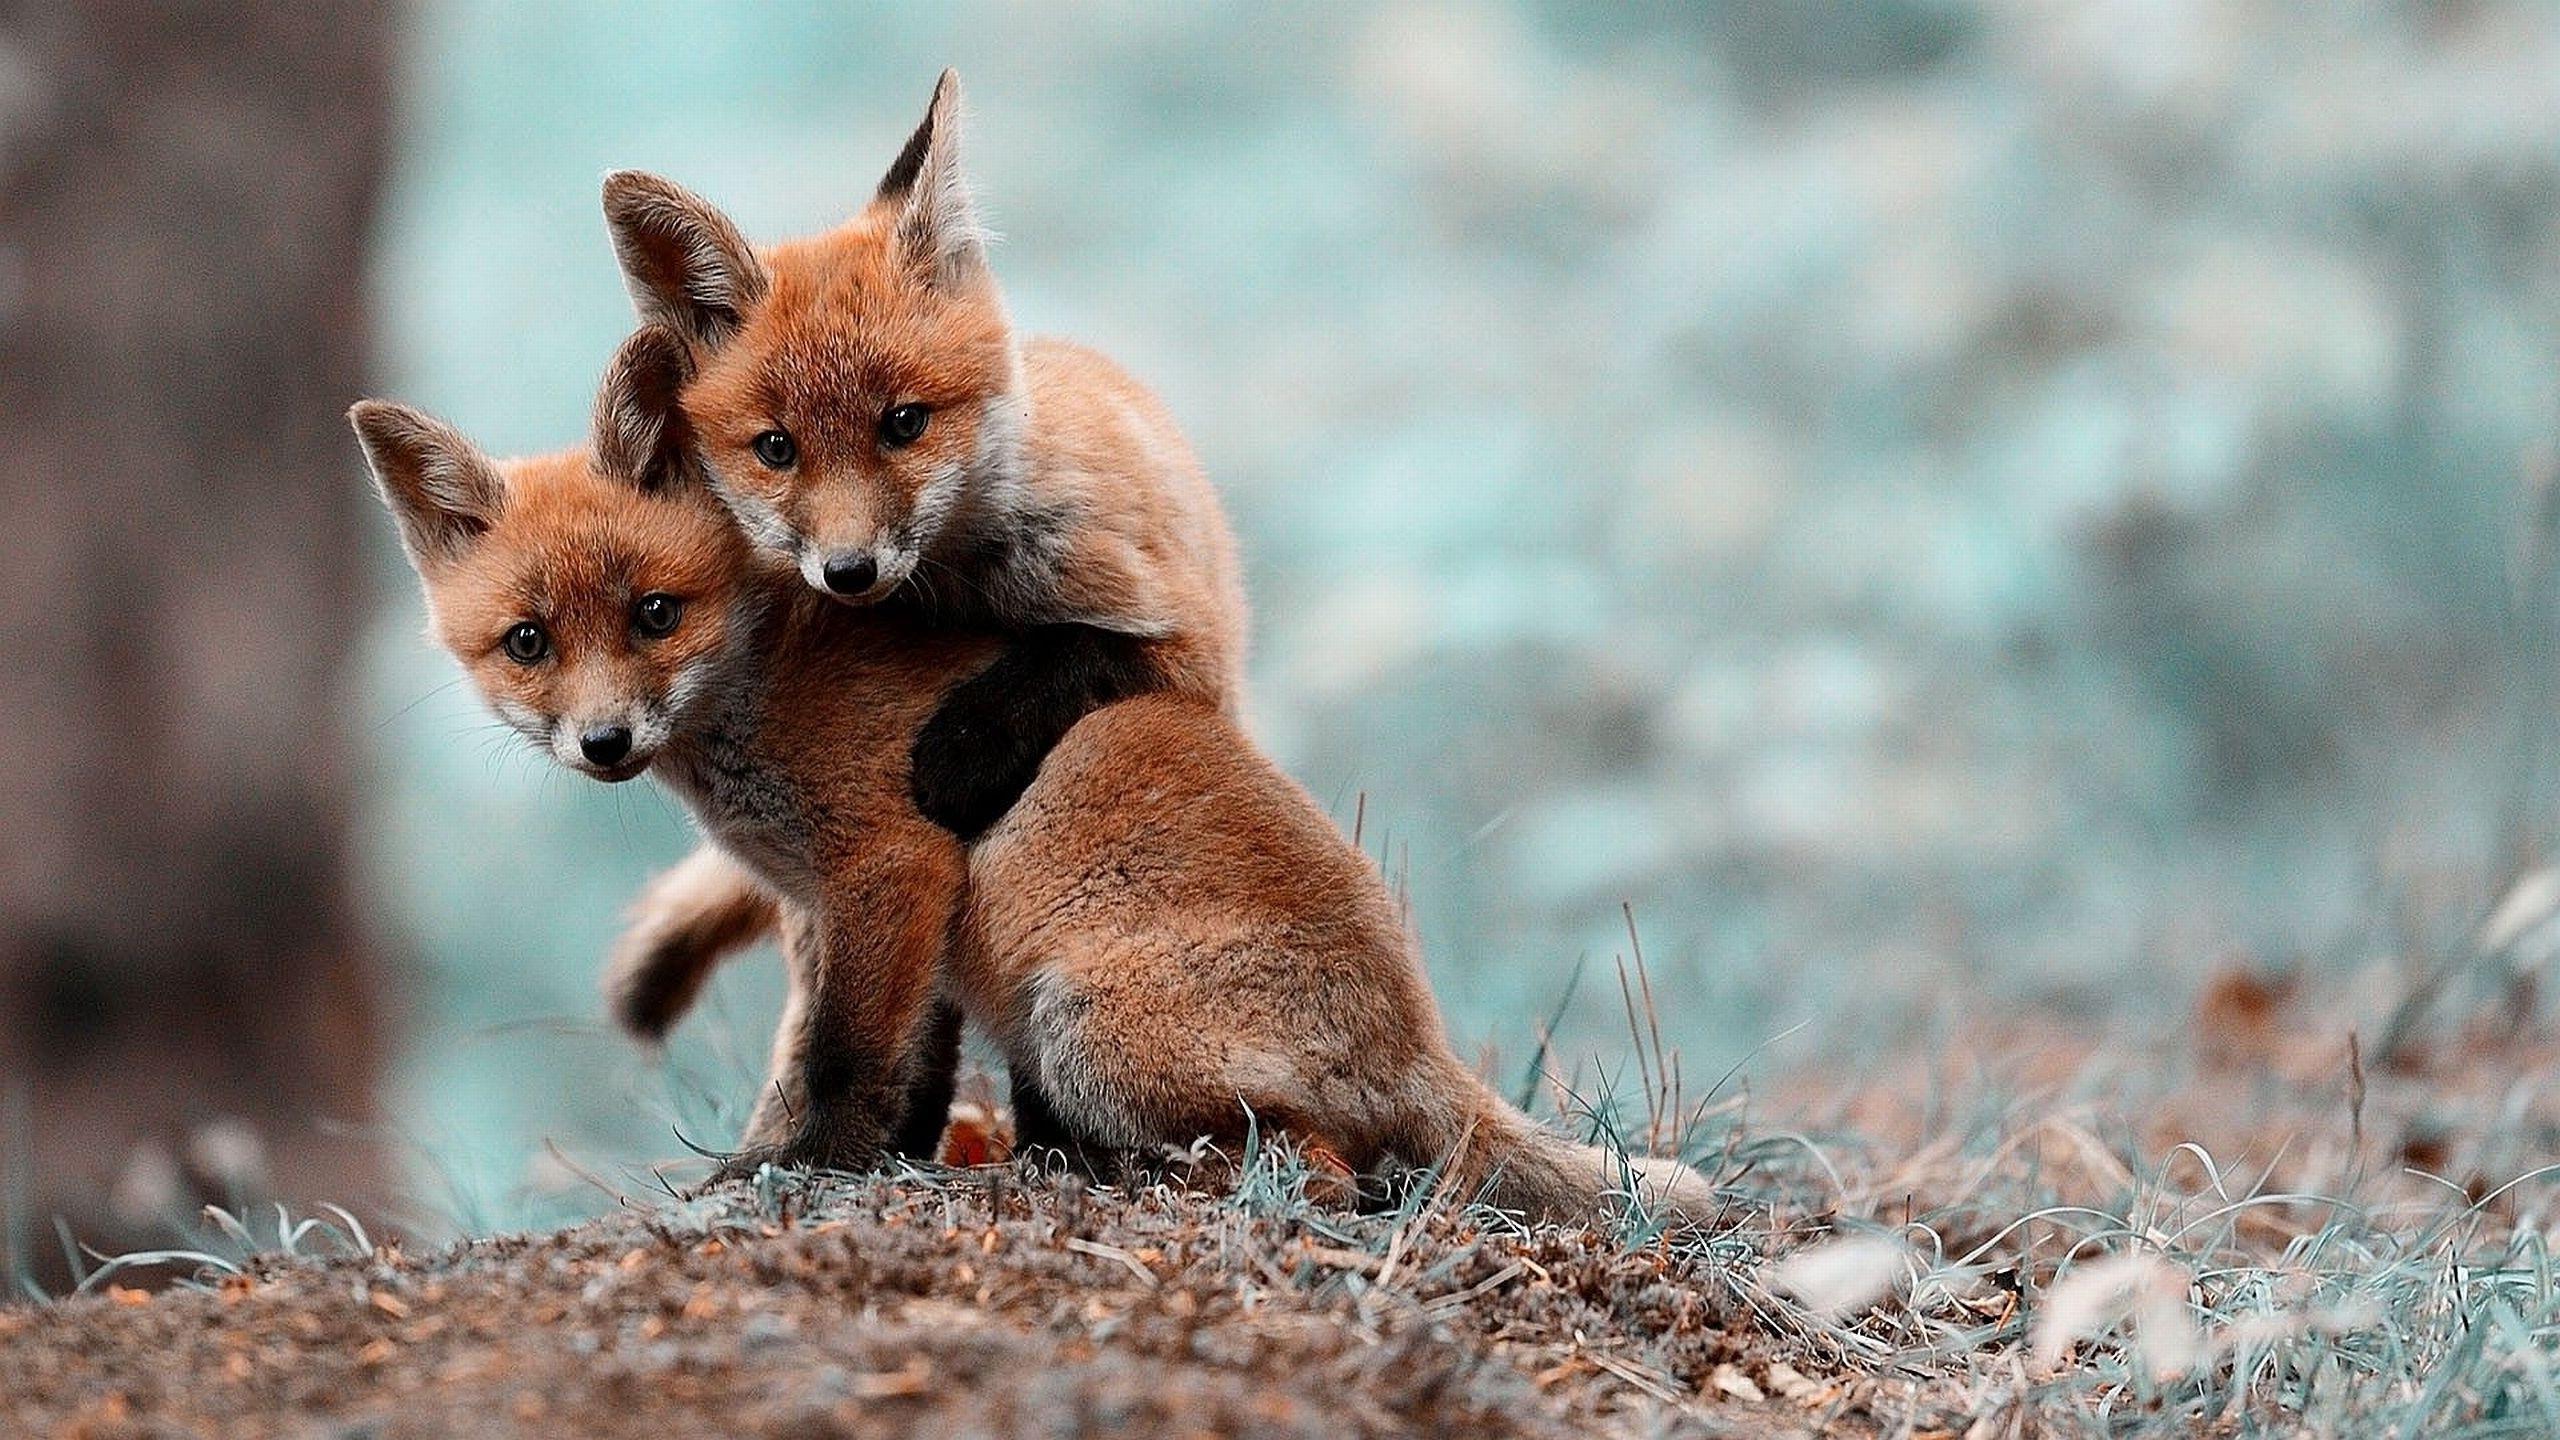 anime cubs fox cubs fox nature blurred animals baby